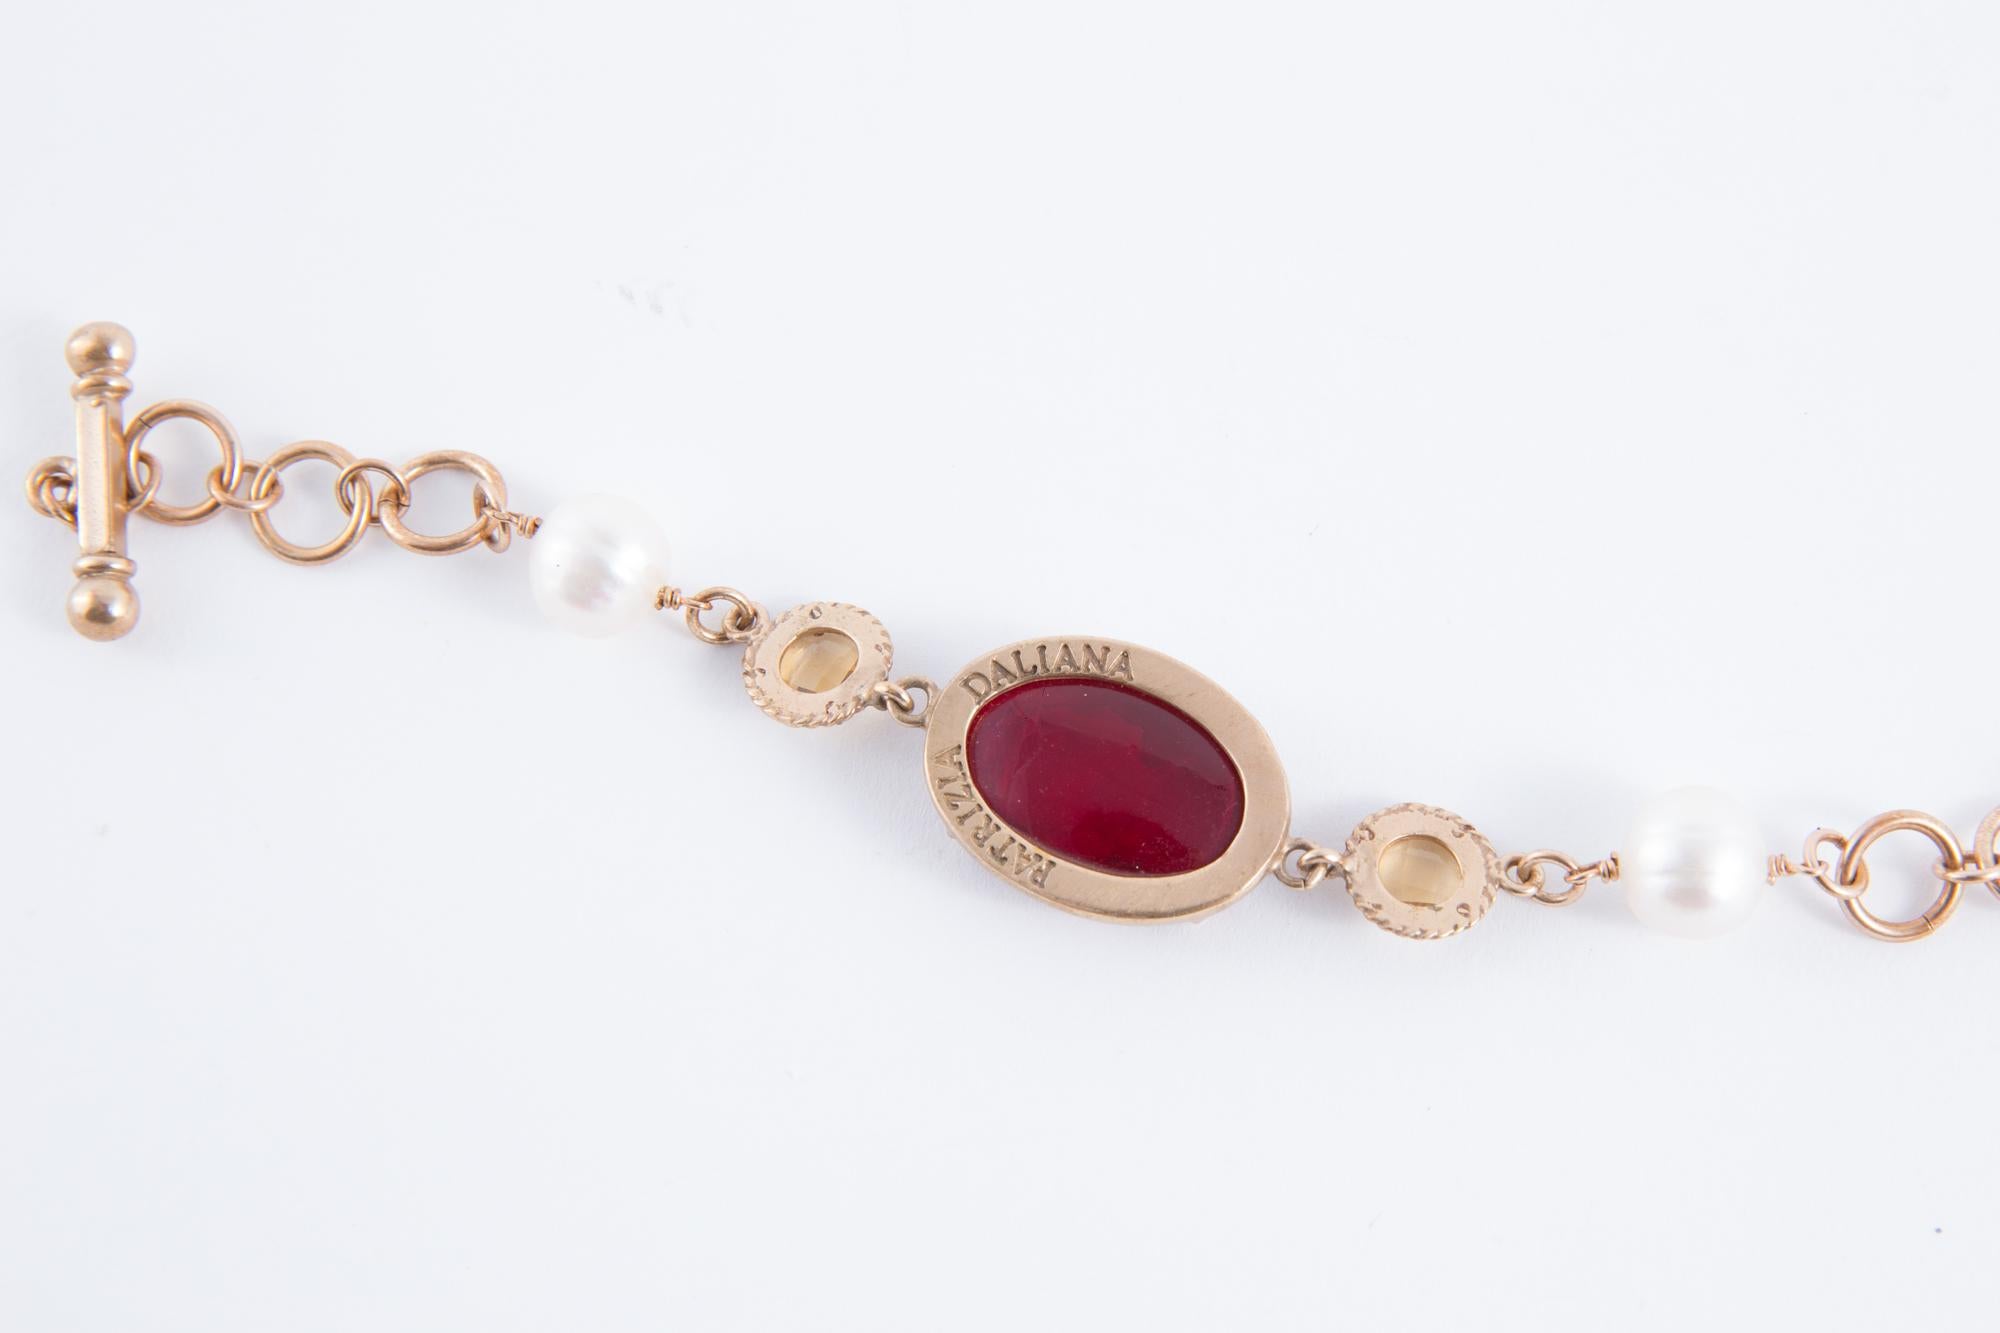 Patrizia Daliana bracelet featuring engraved dark red Murano glass with cameo, faux pearls and gold tone chain. 
8.2in (21cm) X 0.8in (2cm)
In excellent vintage condition. Made in Italy.
We guarantee you will receive this gorgeous item as described